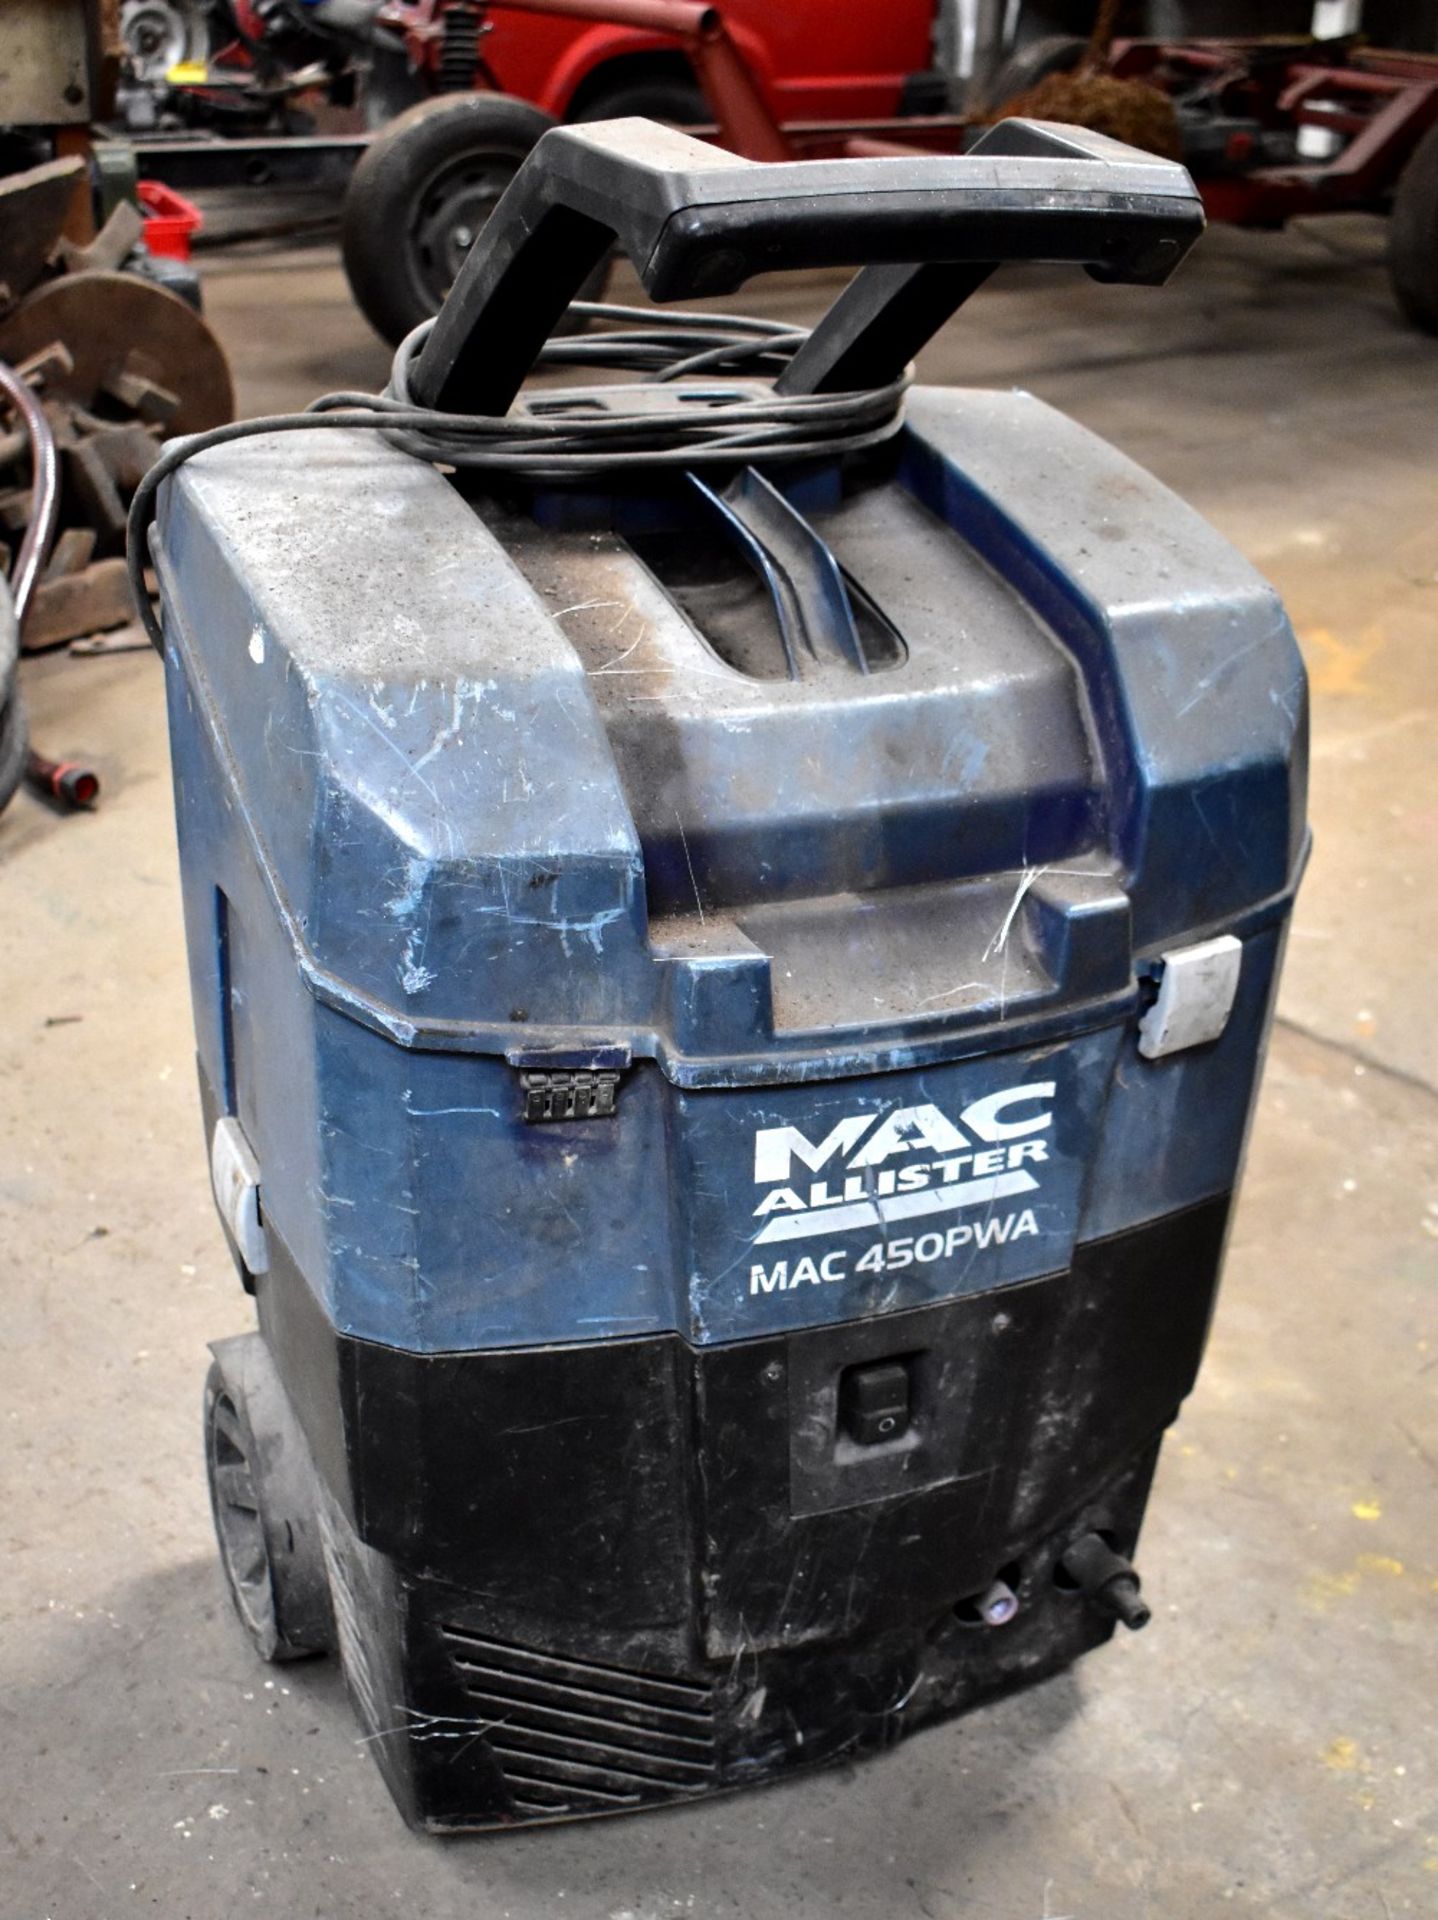 MACALLISTER; a Mac 450 PWA pressure washer, lacking attachments (sold electrically untested).